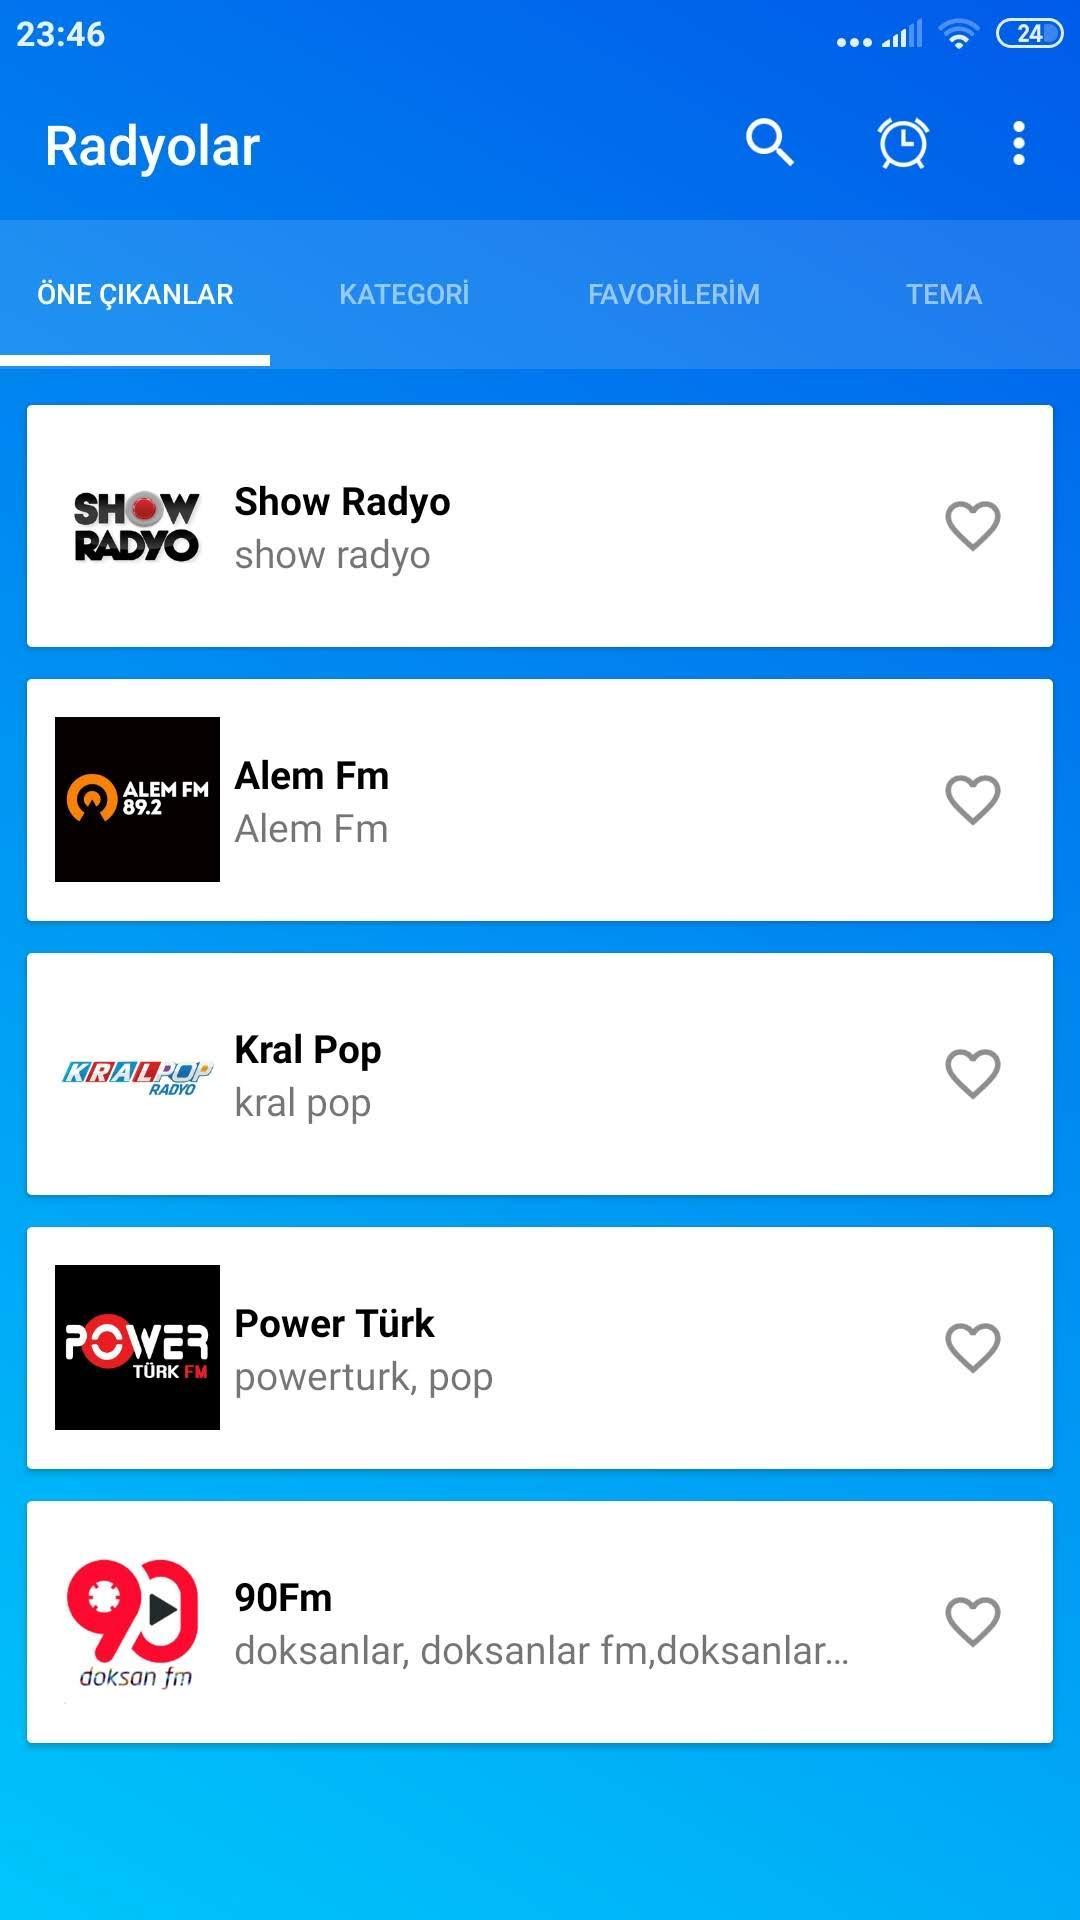 e-Radyo - Online Radyo Dinle for Android - APK Download